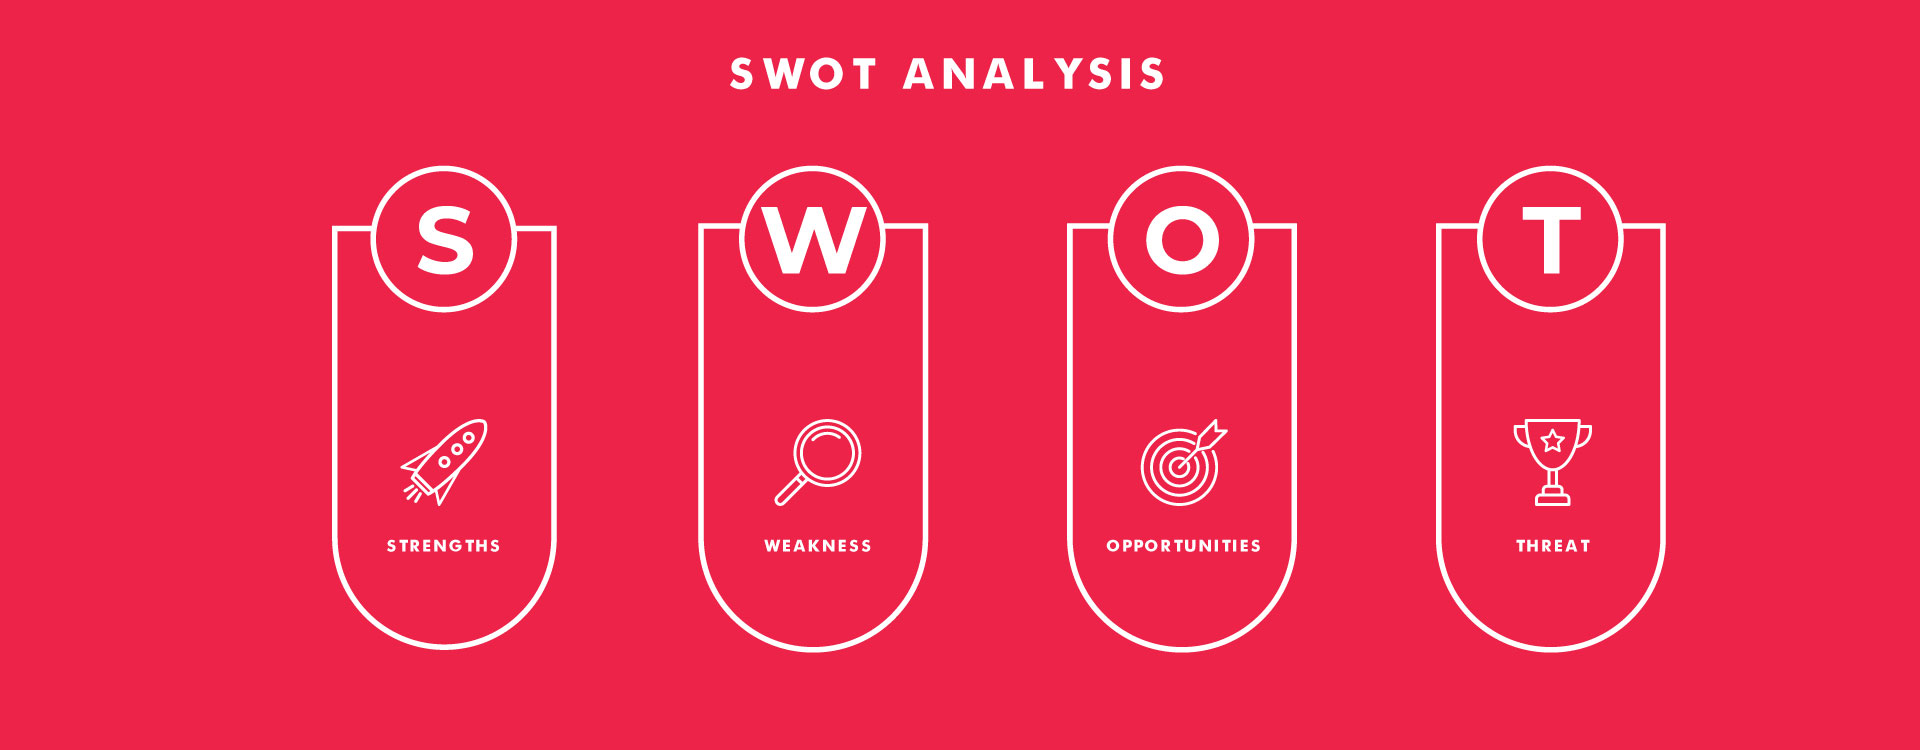 SWOT Analysis for your business.